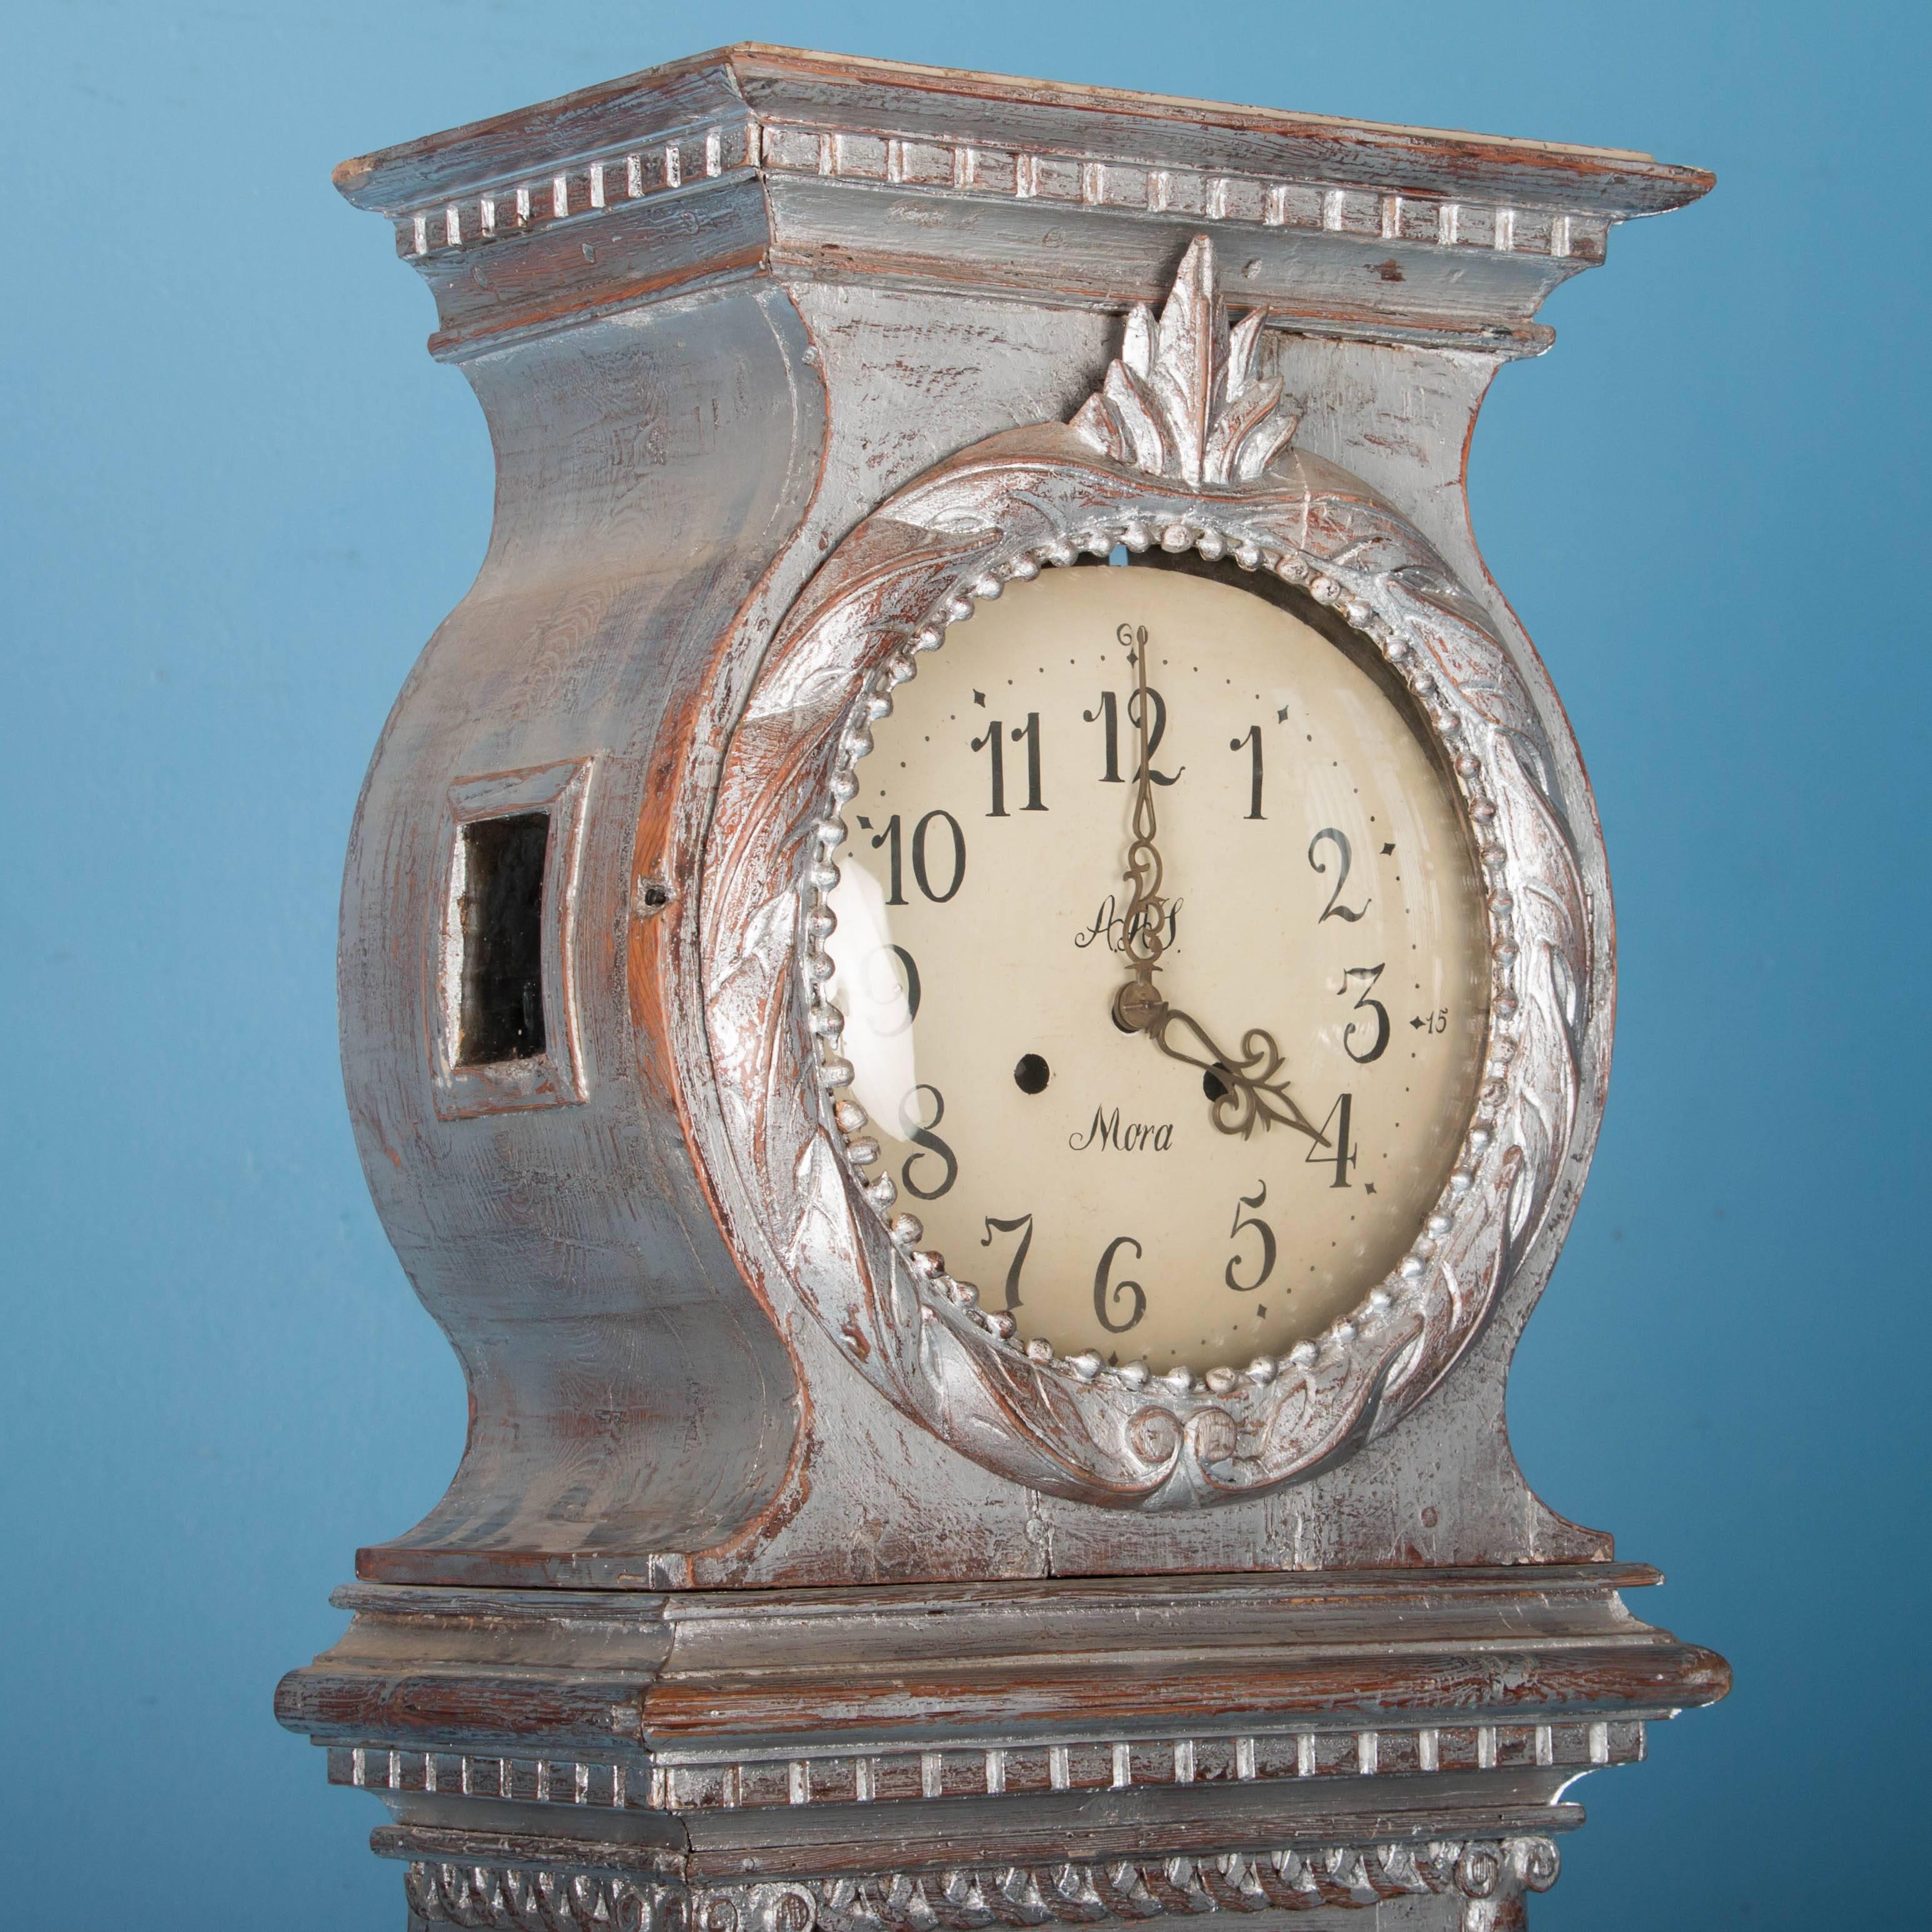 The graceful lines and beautiful, detailed carving throughout this clock add to its elegant appeal, while the unique silver painted finish is captivating. Reminiscent of mercury glass, there is a unique dimensional quality to the painted finish that